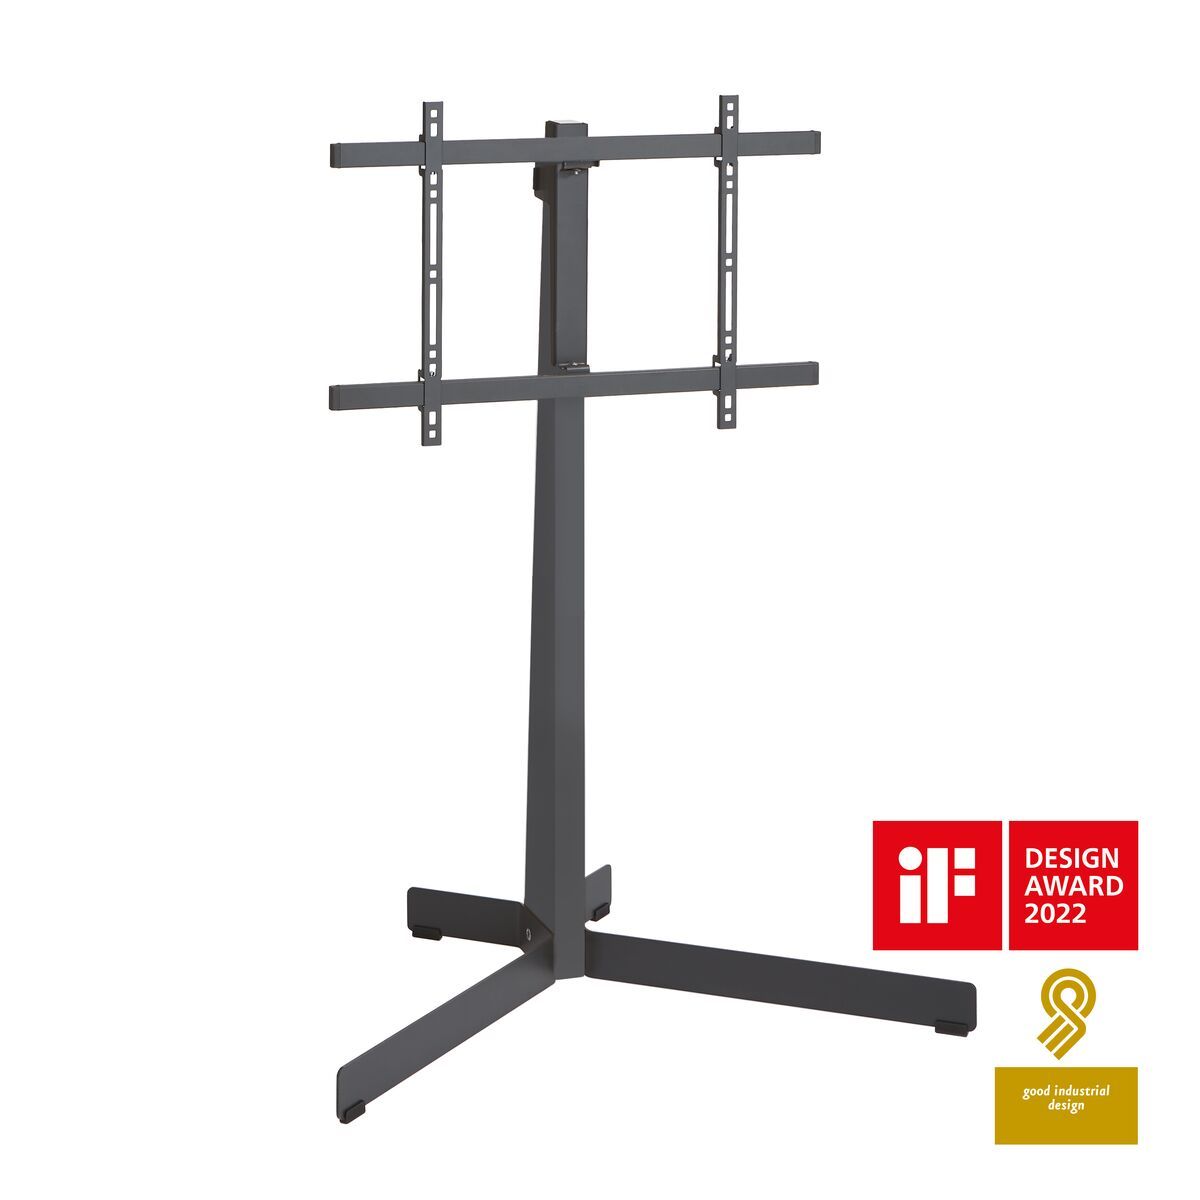 Vogel's TVS 3690 TV Floor Stand (black) - Suitable for 40 up to 77 inch TVs up to Promo